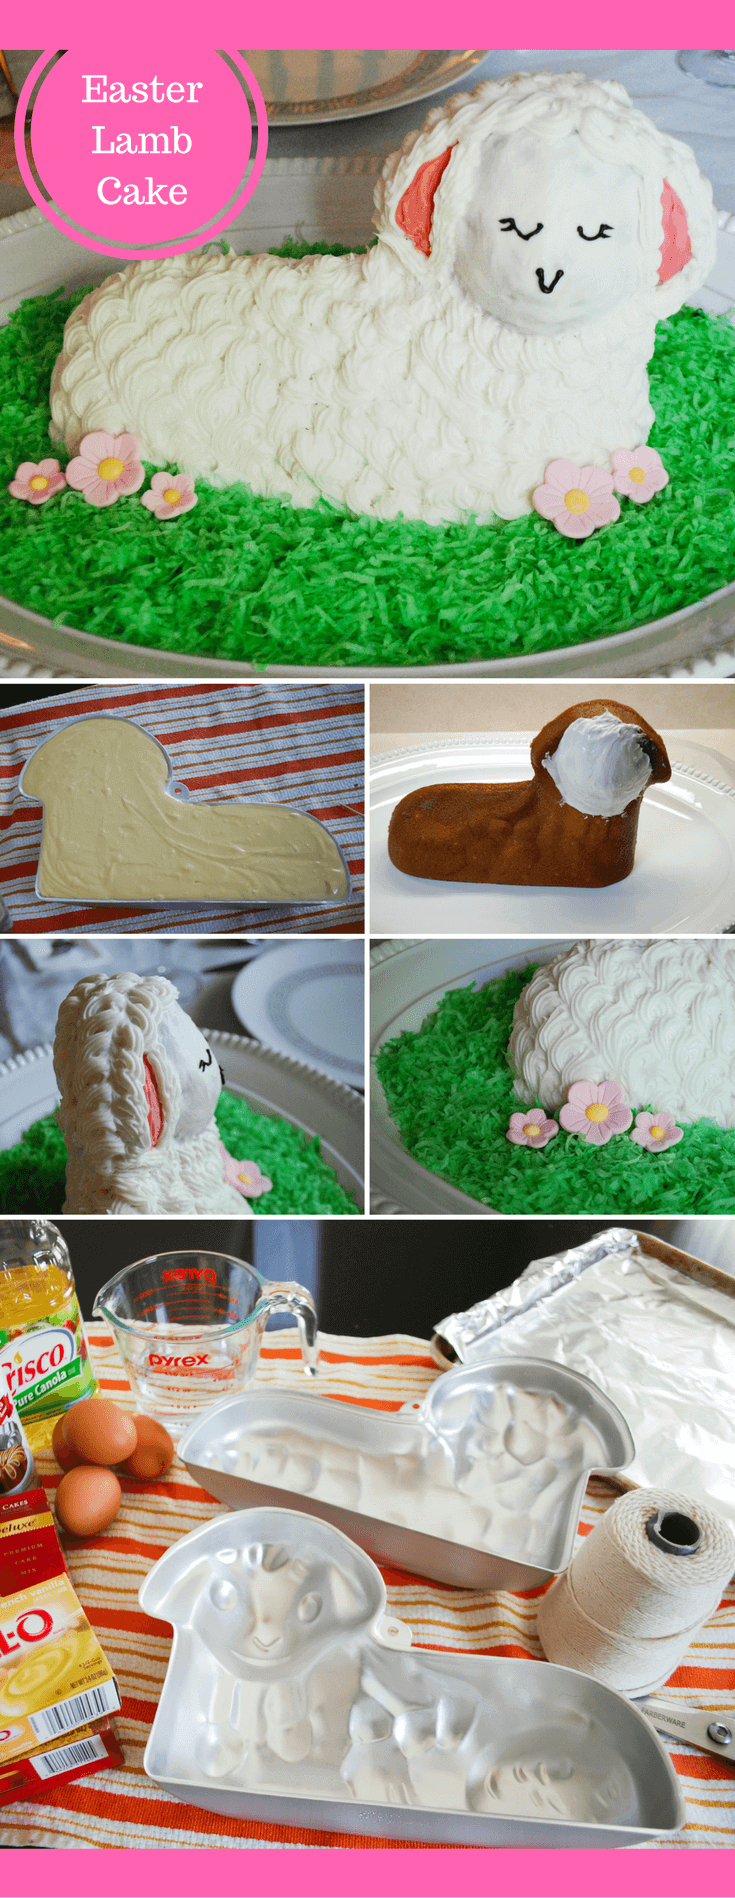 How to make and decorate a traditional 3D standup Easter lamb cake